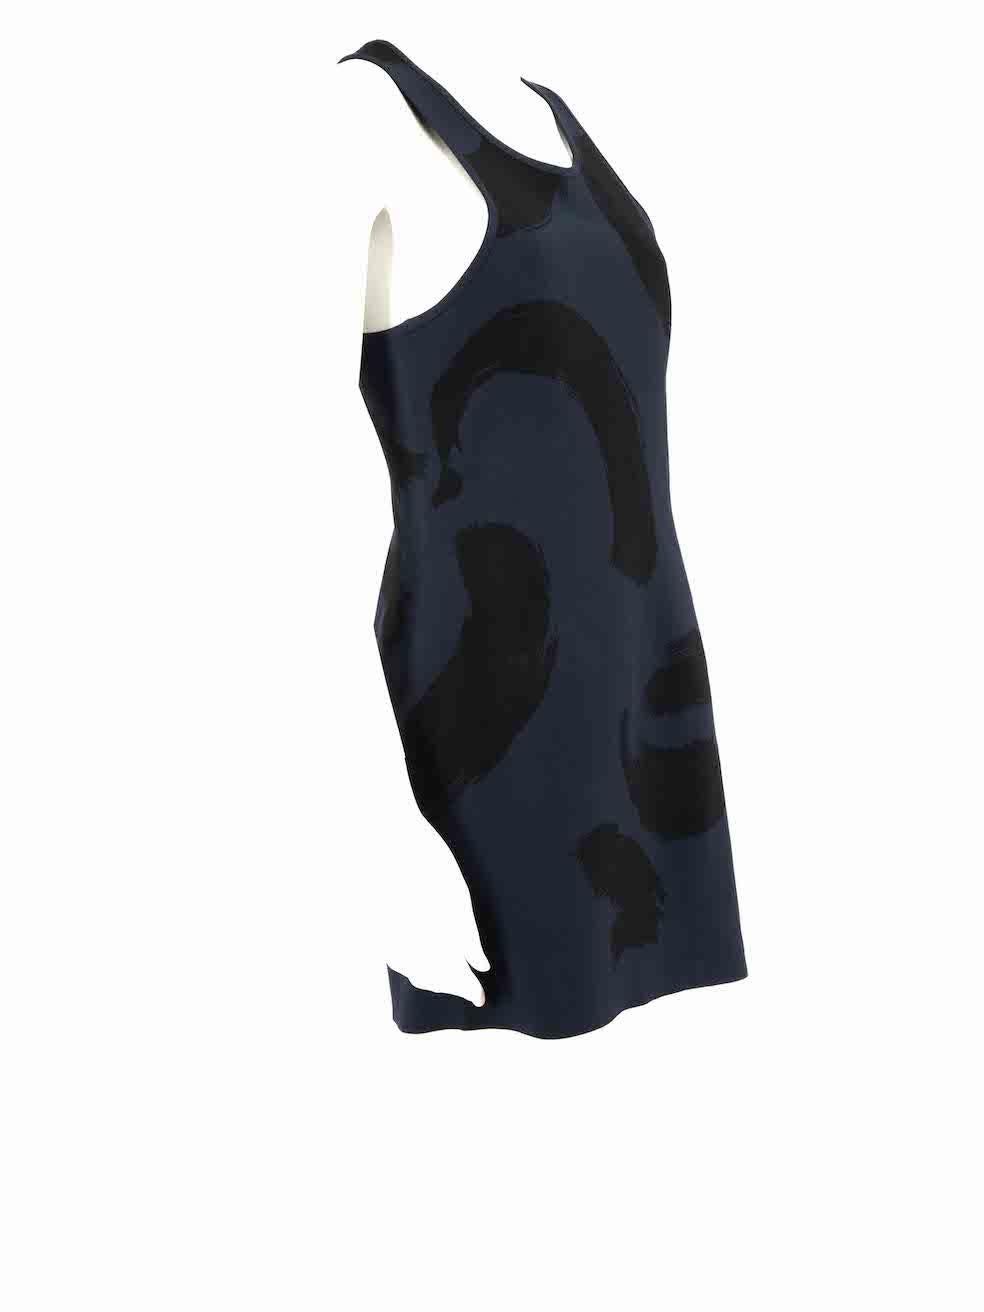 CONDITION is Very good. Minimal wear to dress is evident. Minimal dried glue stains to front right and rear right on this used Céline designer resale item.
 
Details
Navy
Viscose
Bodycon dress
Black paint stroke pattern
Mini
Sleeveless
Round